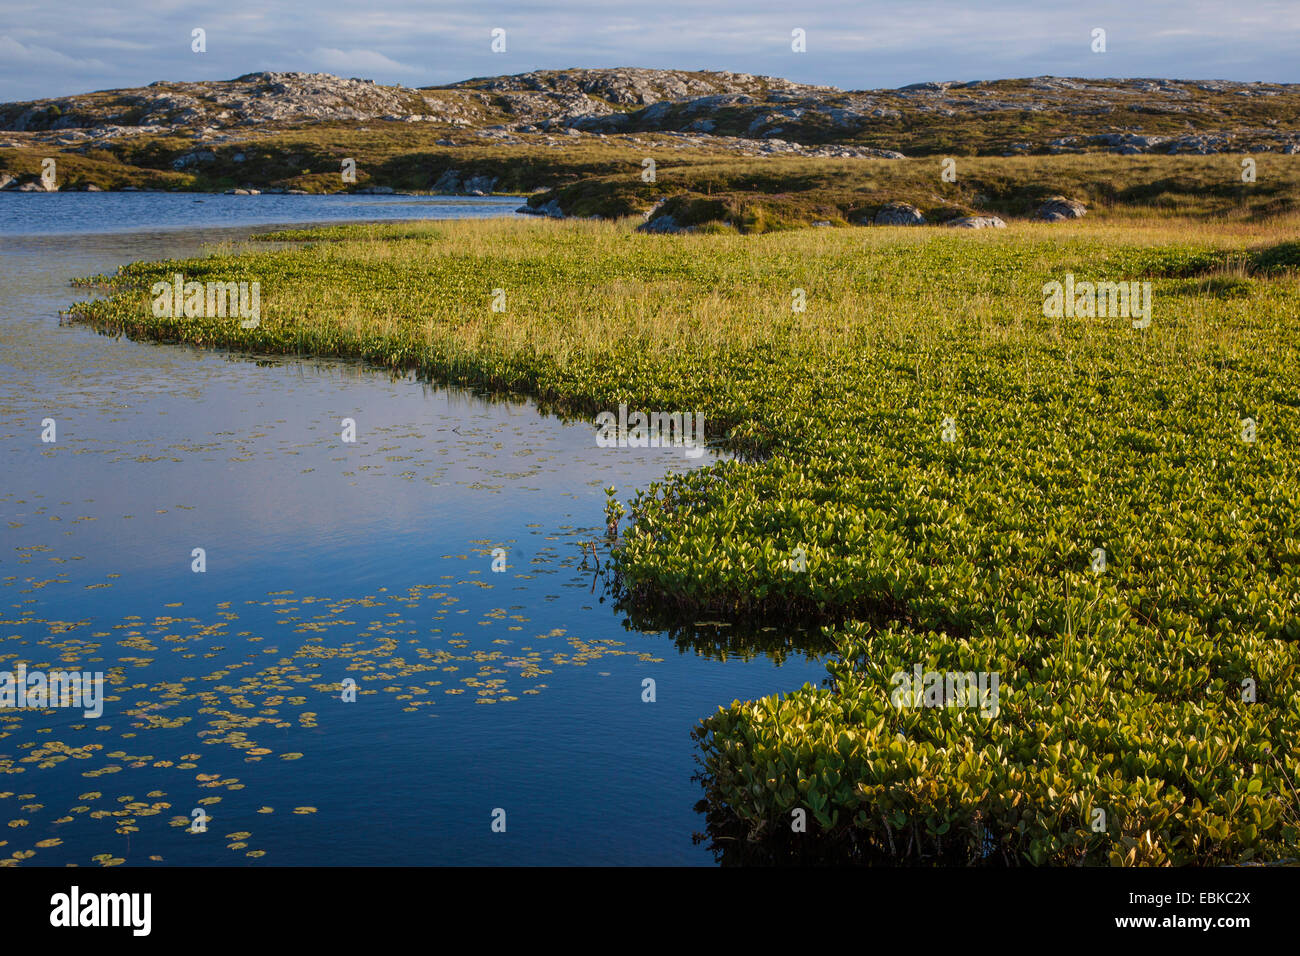 Hitra High Resolution Stock Photography and Images - Alamy